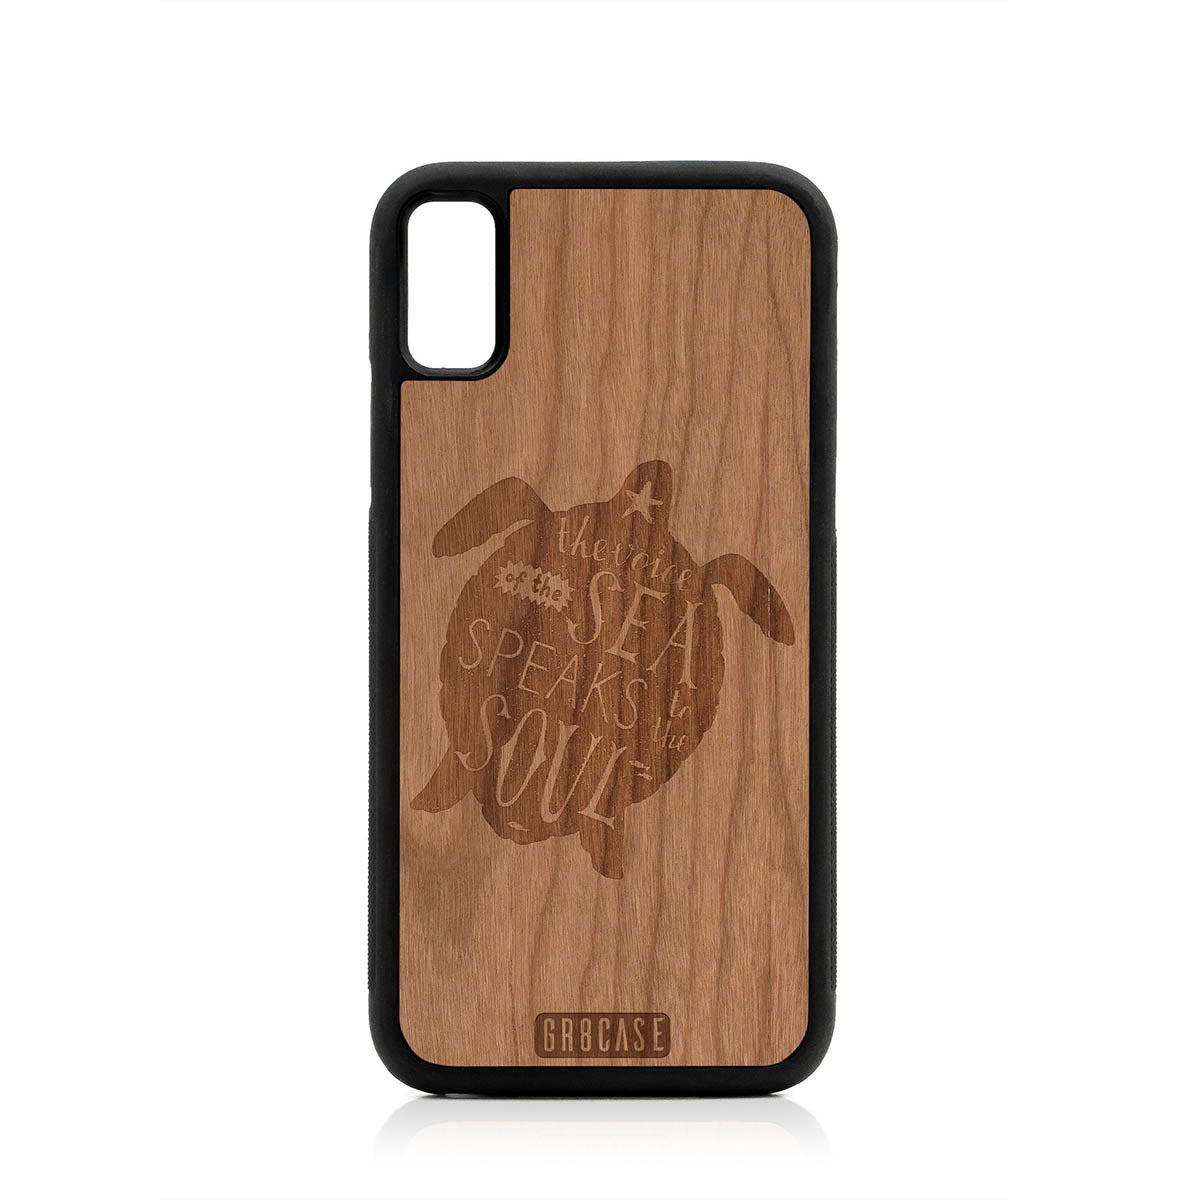 The Voice Of The Sea Speaks To The Soul (Turtle) Design Wood Case For iPhone XS Max